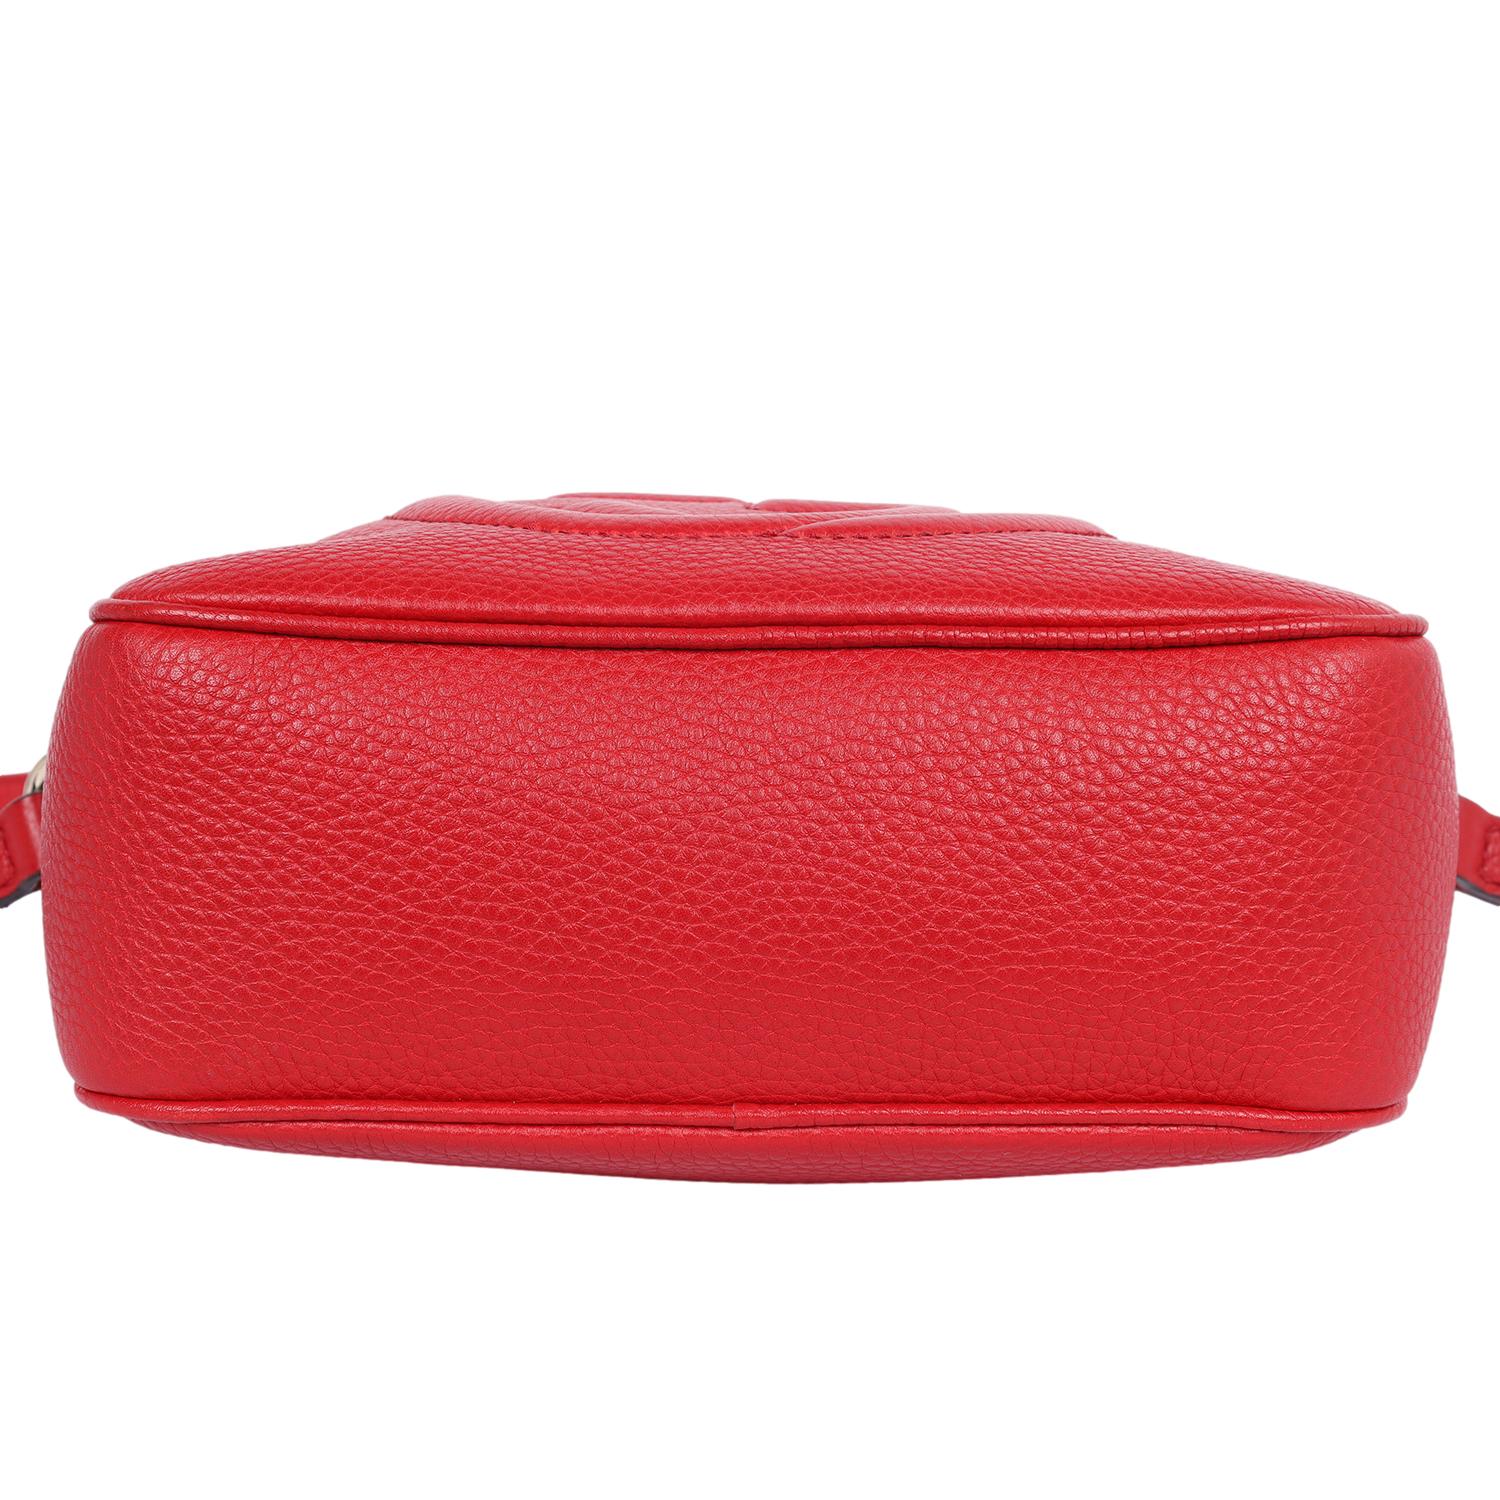 Gucci GG Red Soho Disco Leather Cross Body Bag For Sale 8